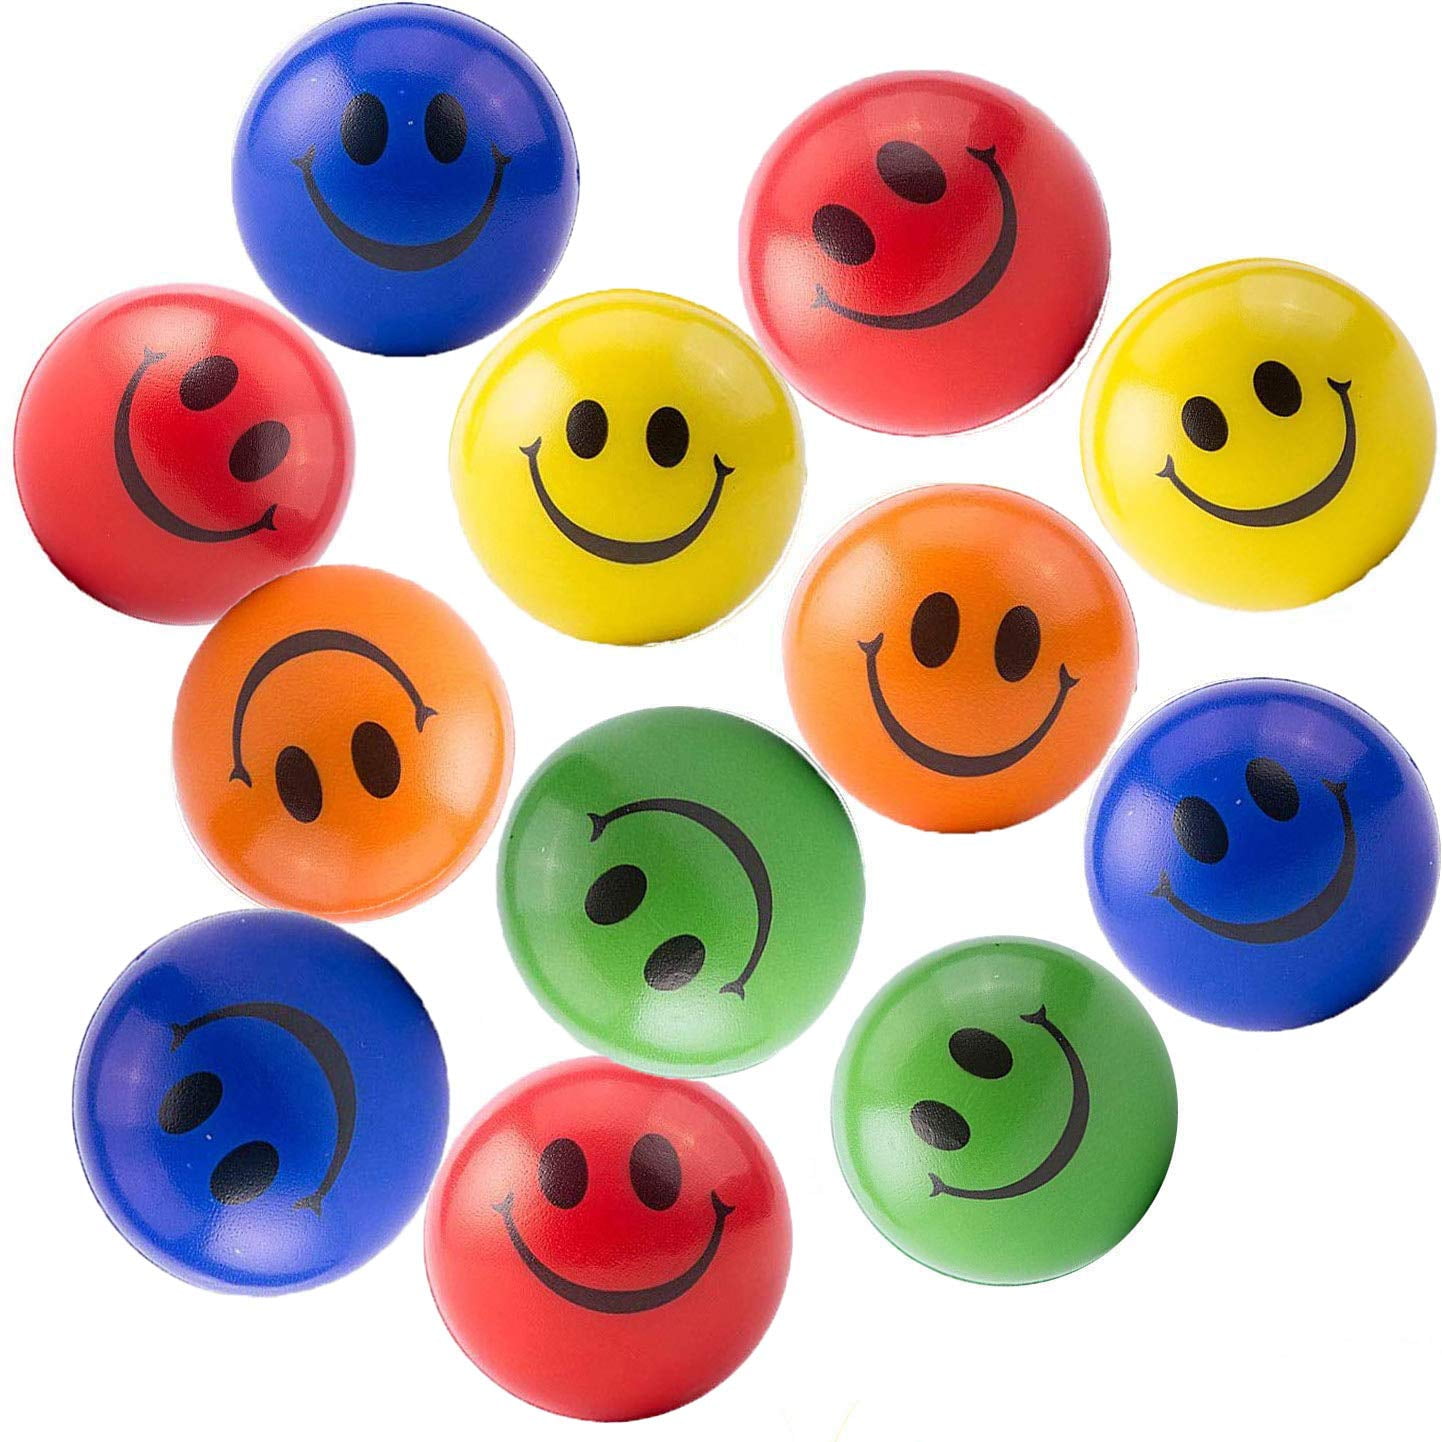 2 SMILE SMILEY FACE STRESS RELIEF BALLS 2" FOAM HAND THERAPY SQUEEZE TOY BALL 